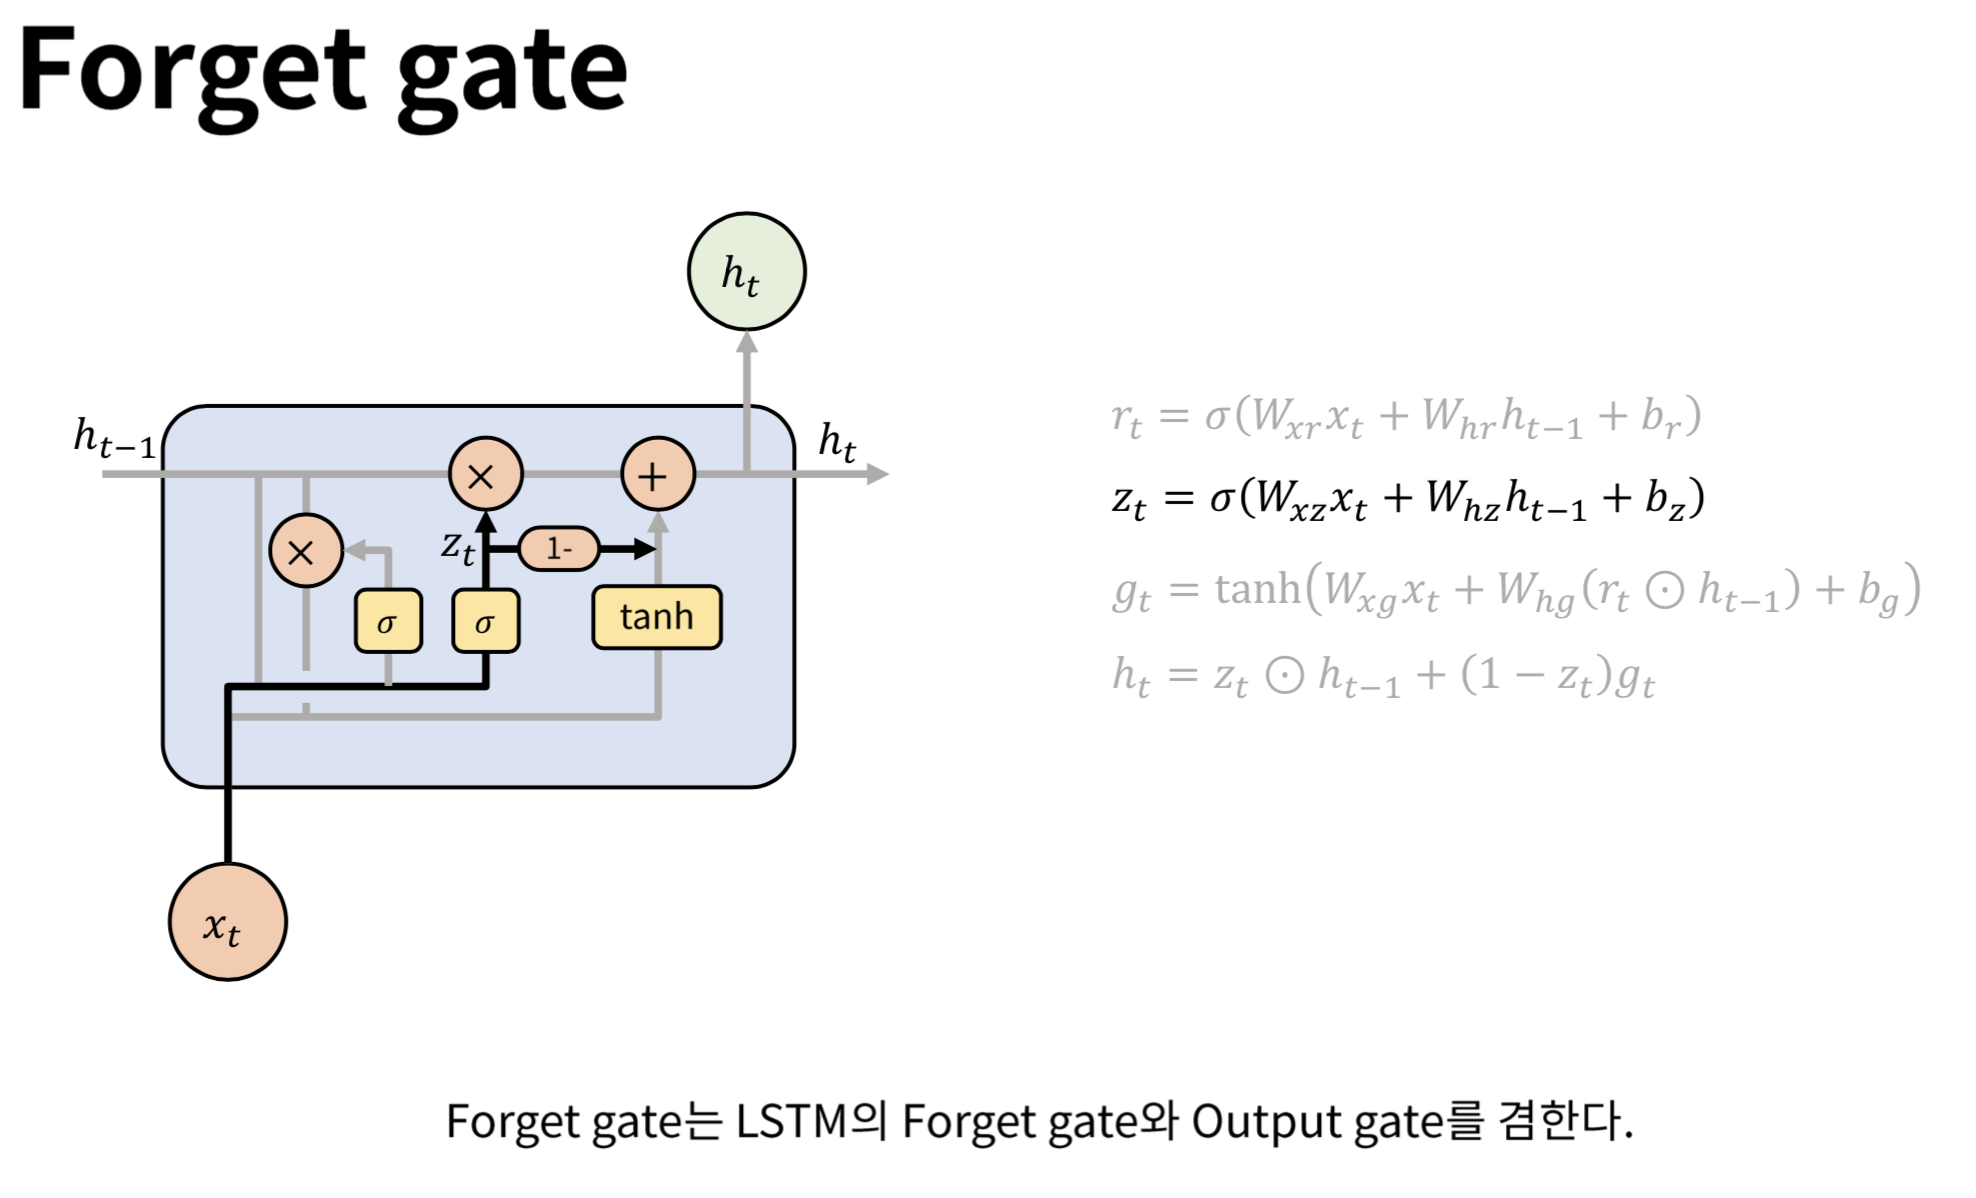 Forget gate